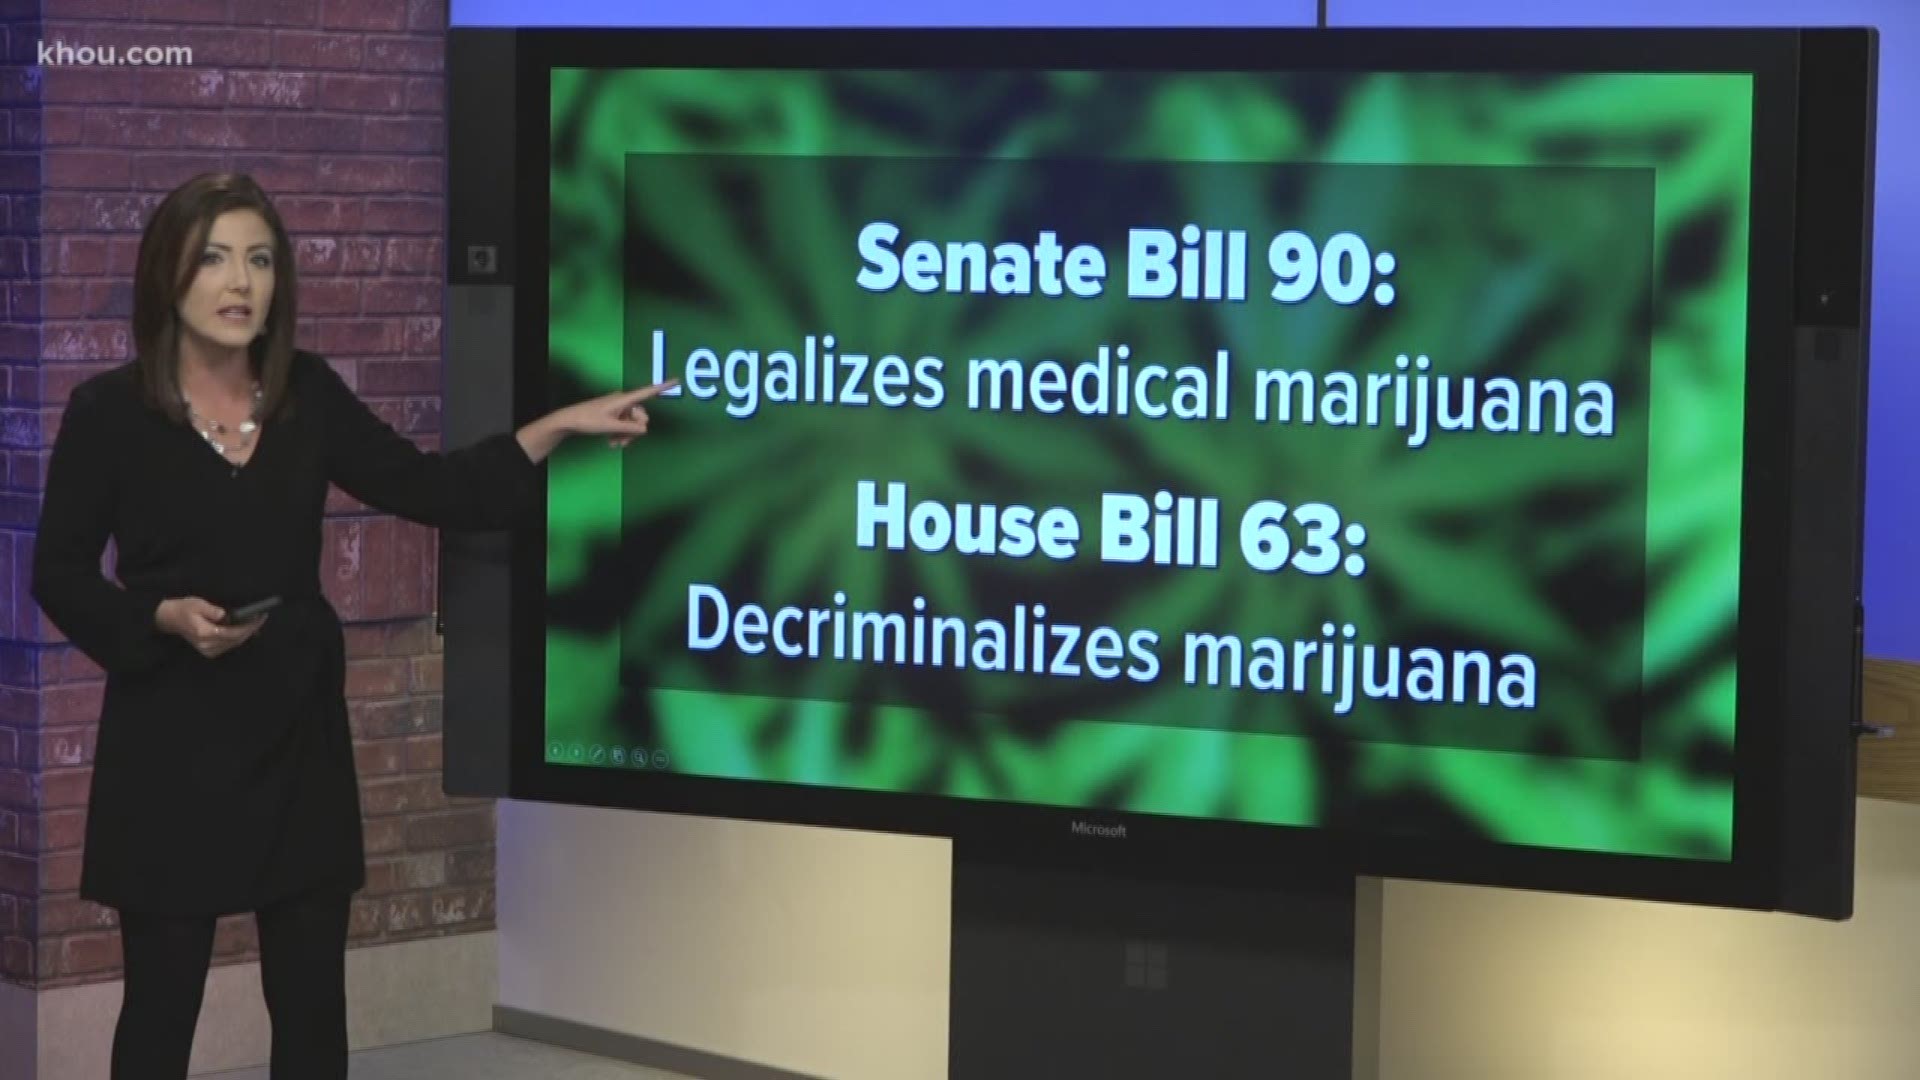 They cover everything from voting reform to legalizing marijuana.